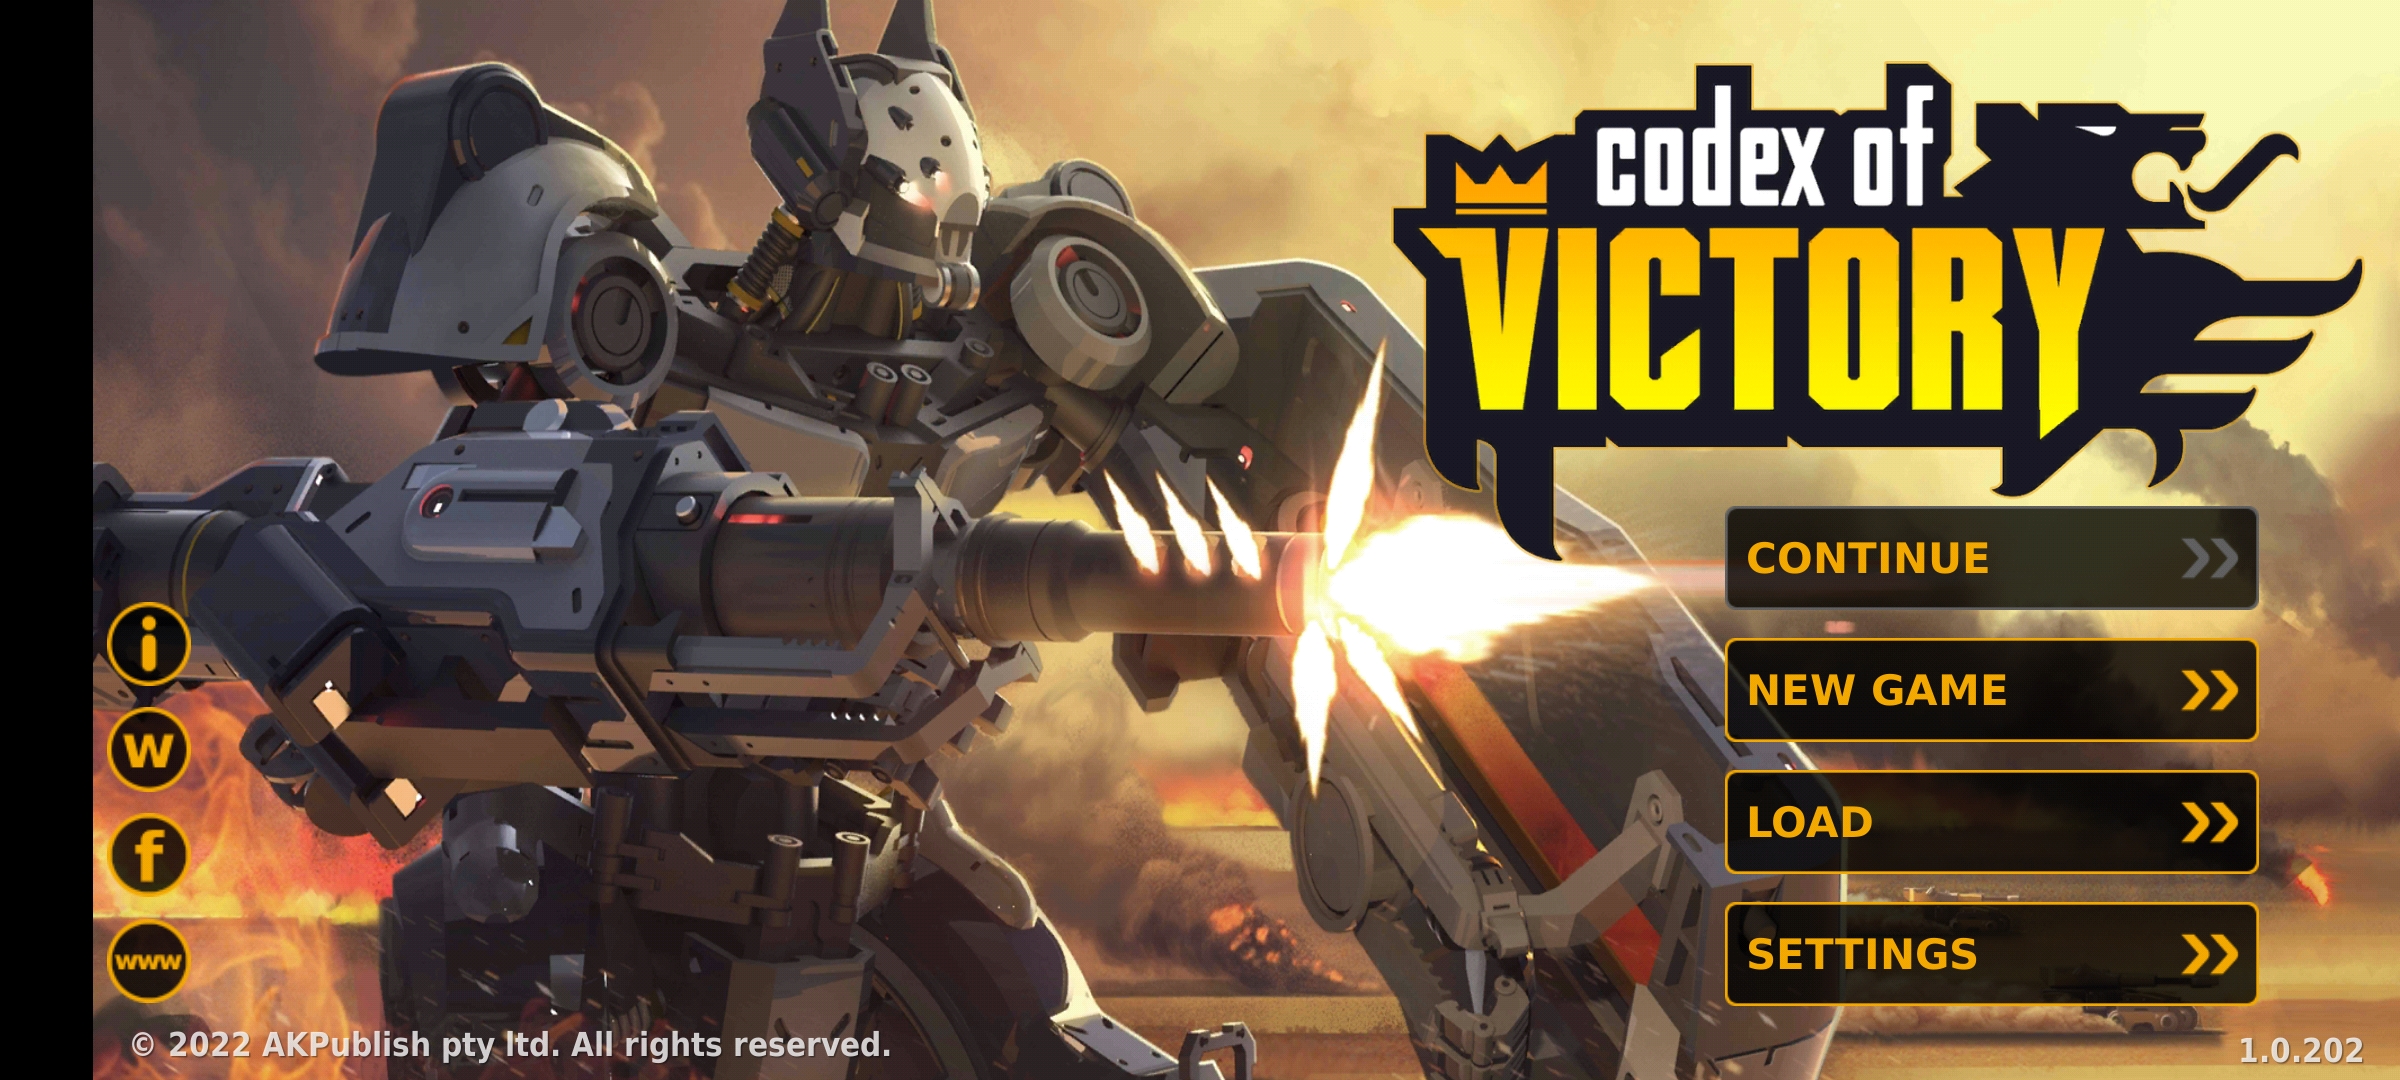 [Game Android] Codex of Victory